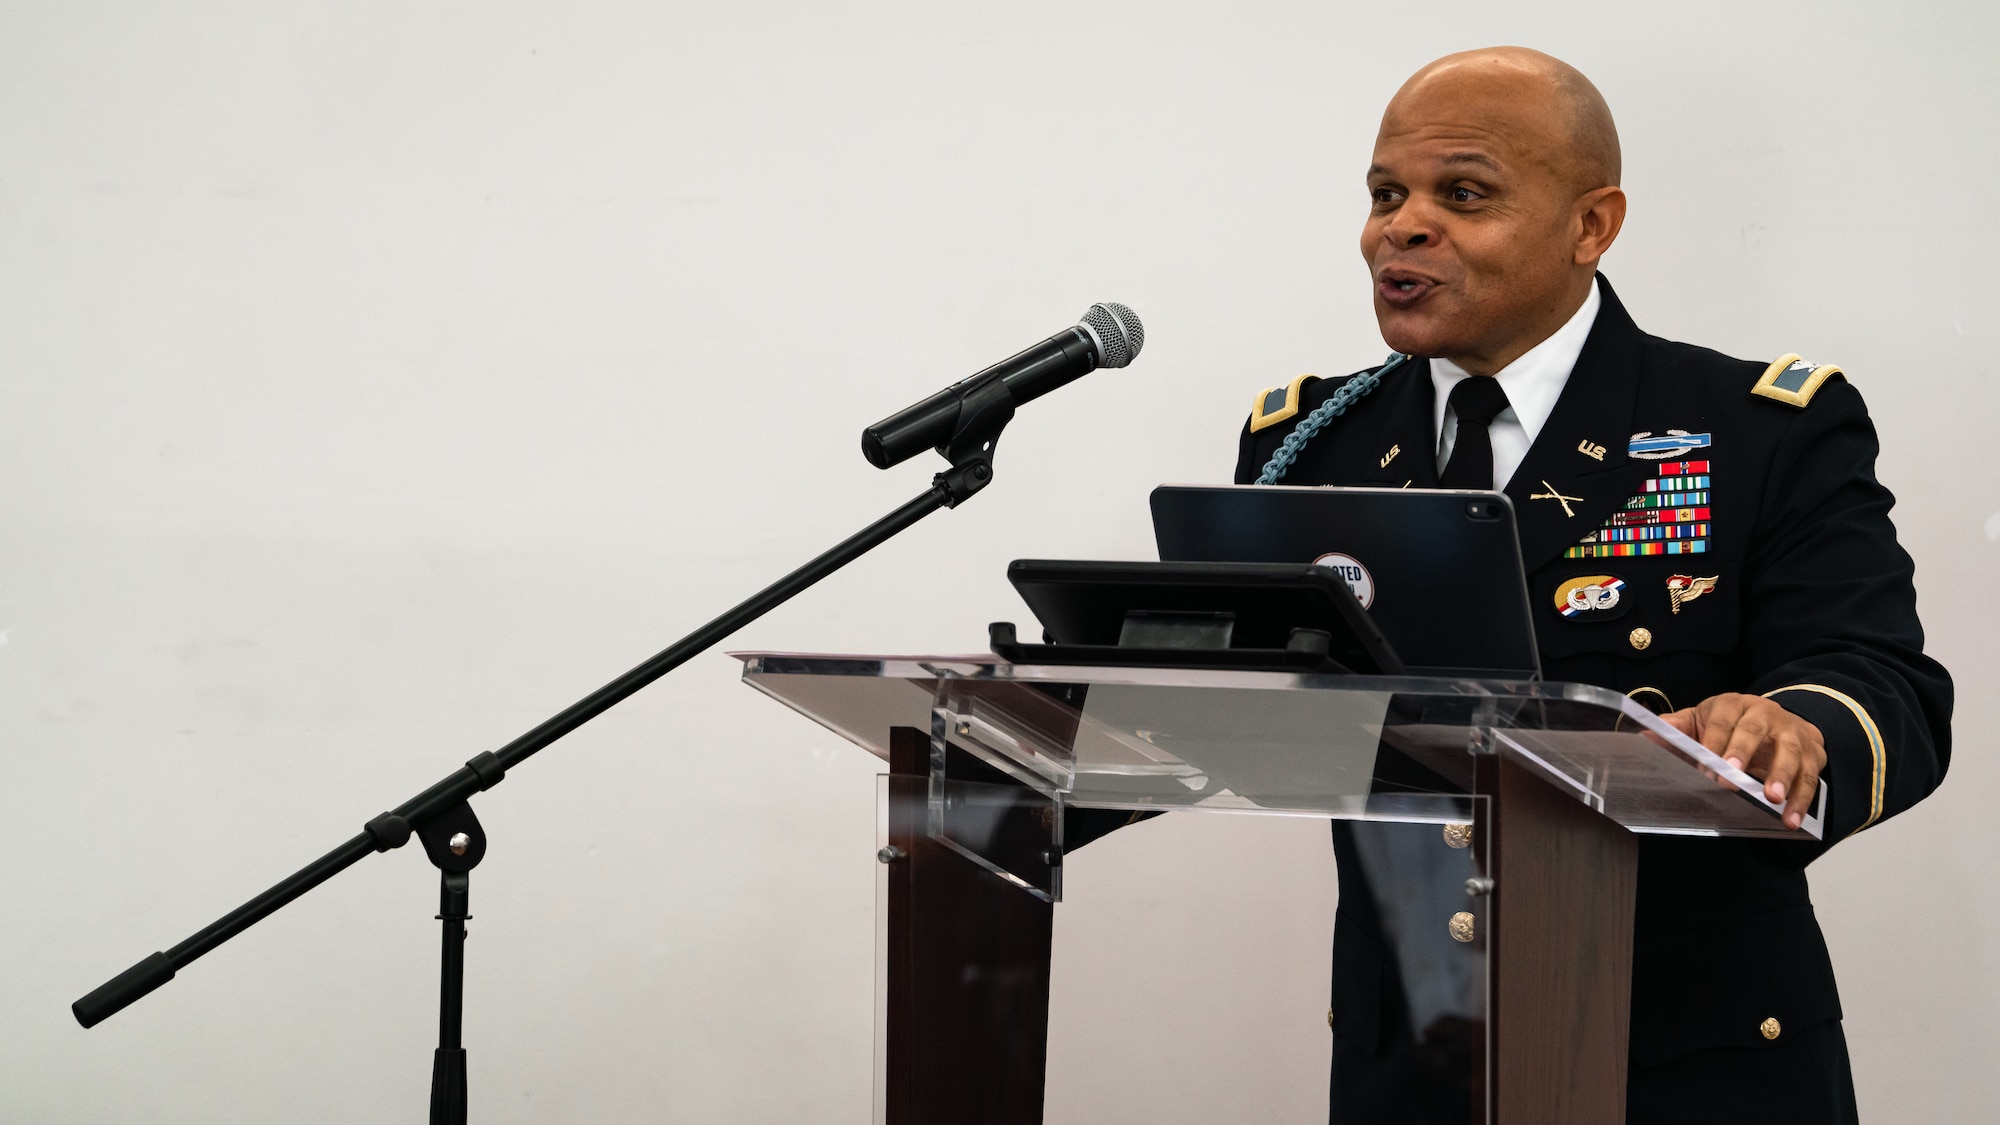 U.S. Army Col. Okera Anyabwile, U.S. Special Operations Command Wargame Center director, speaks to members as a distinguished guest at a commemorative luncheon celebrating Black History Month at MacDill Air Force Base, Florida, Feb. 24, 2022.